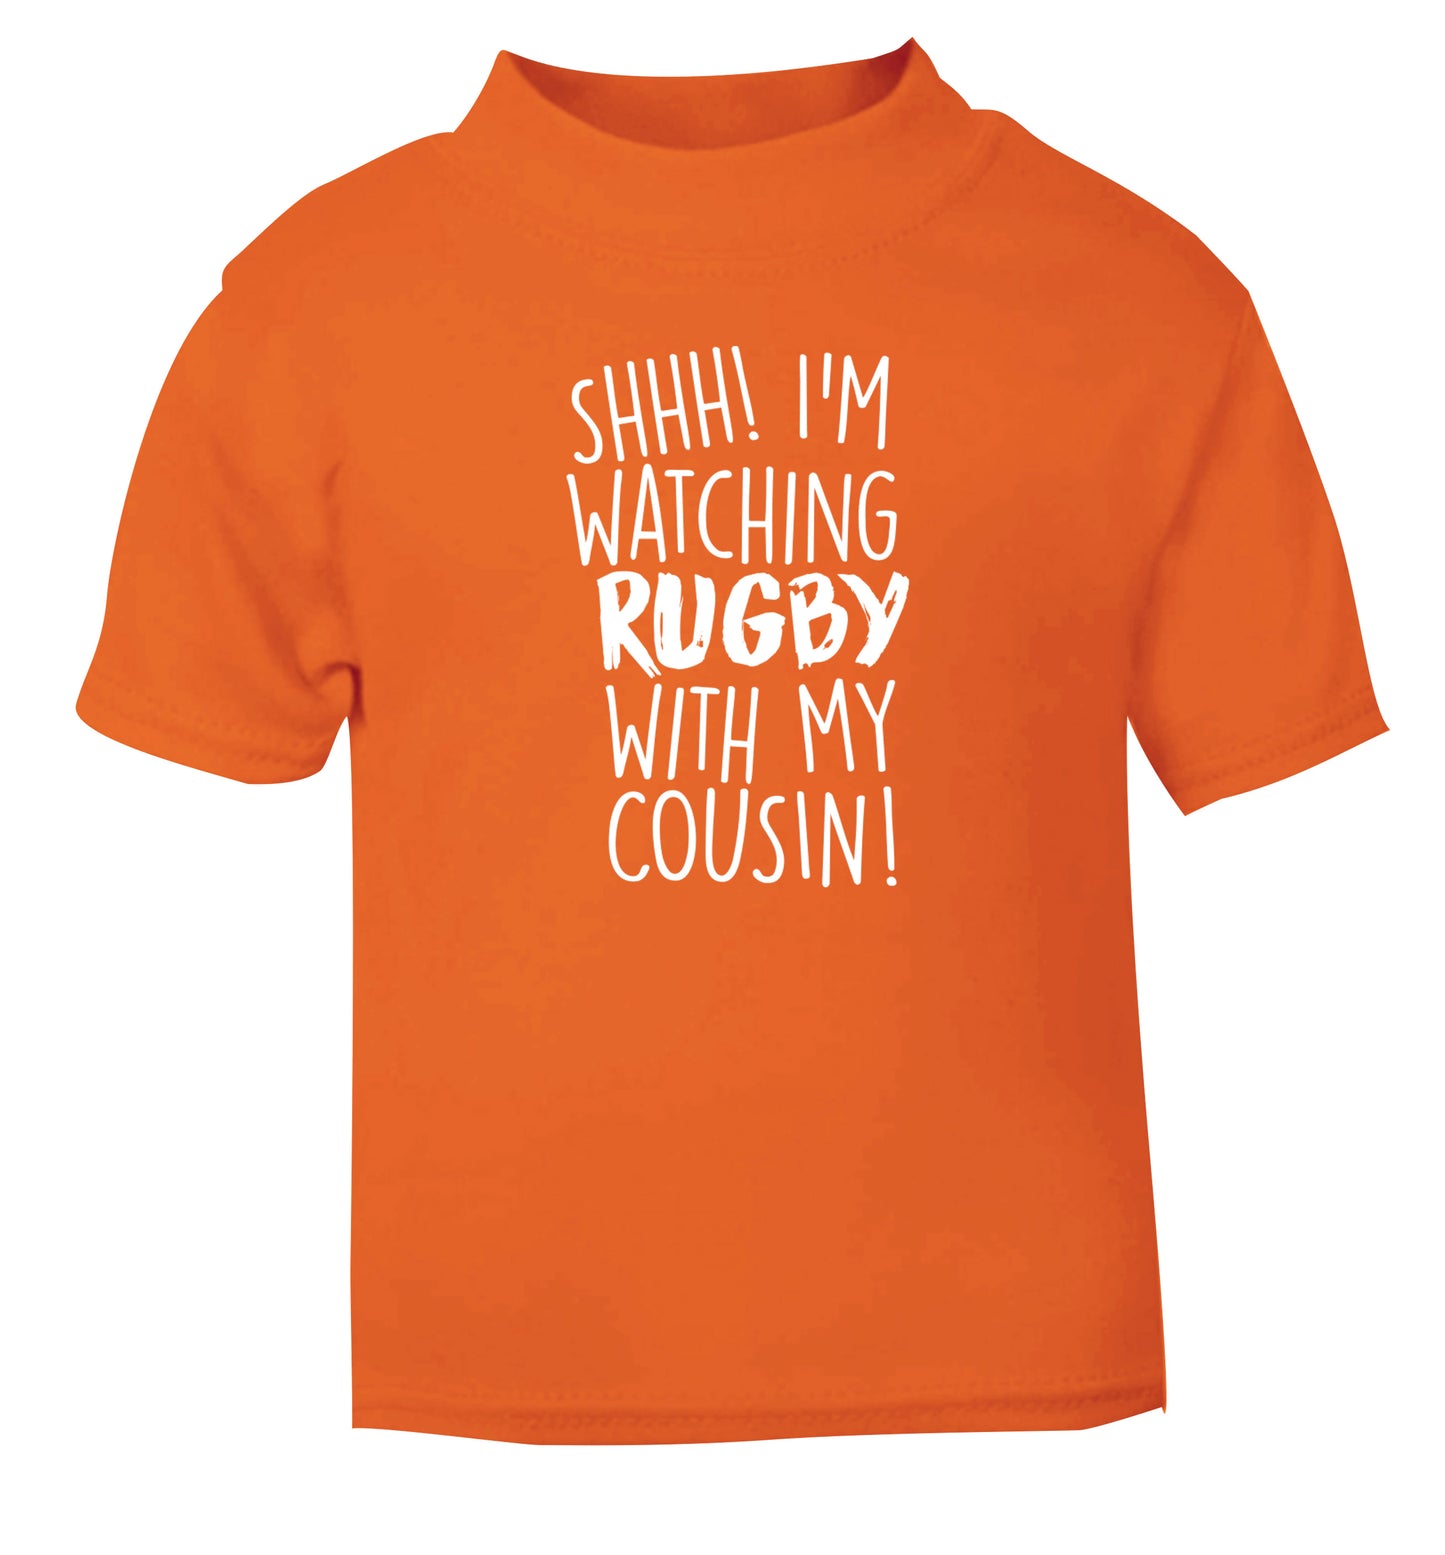 Shhh I'm watching rugby with my cousin orange Baby Toddler Tshirt 2 Years